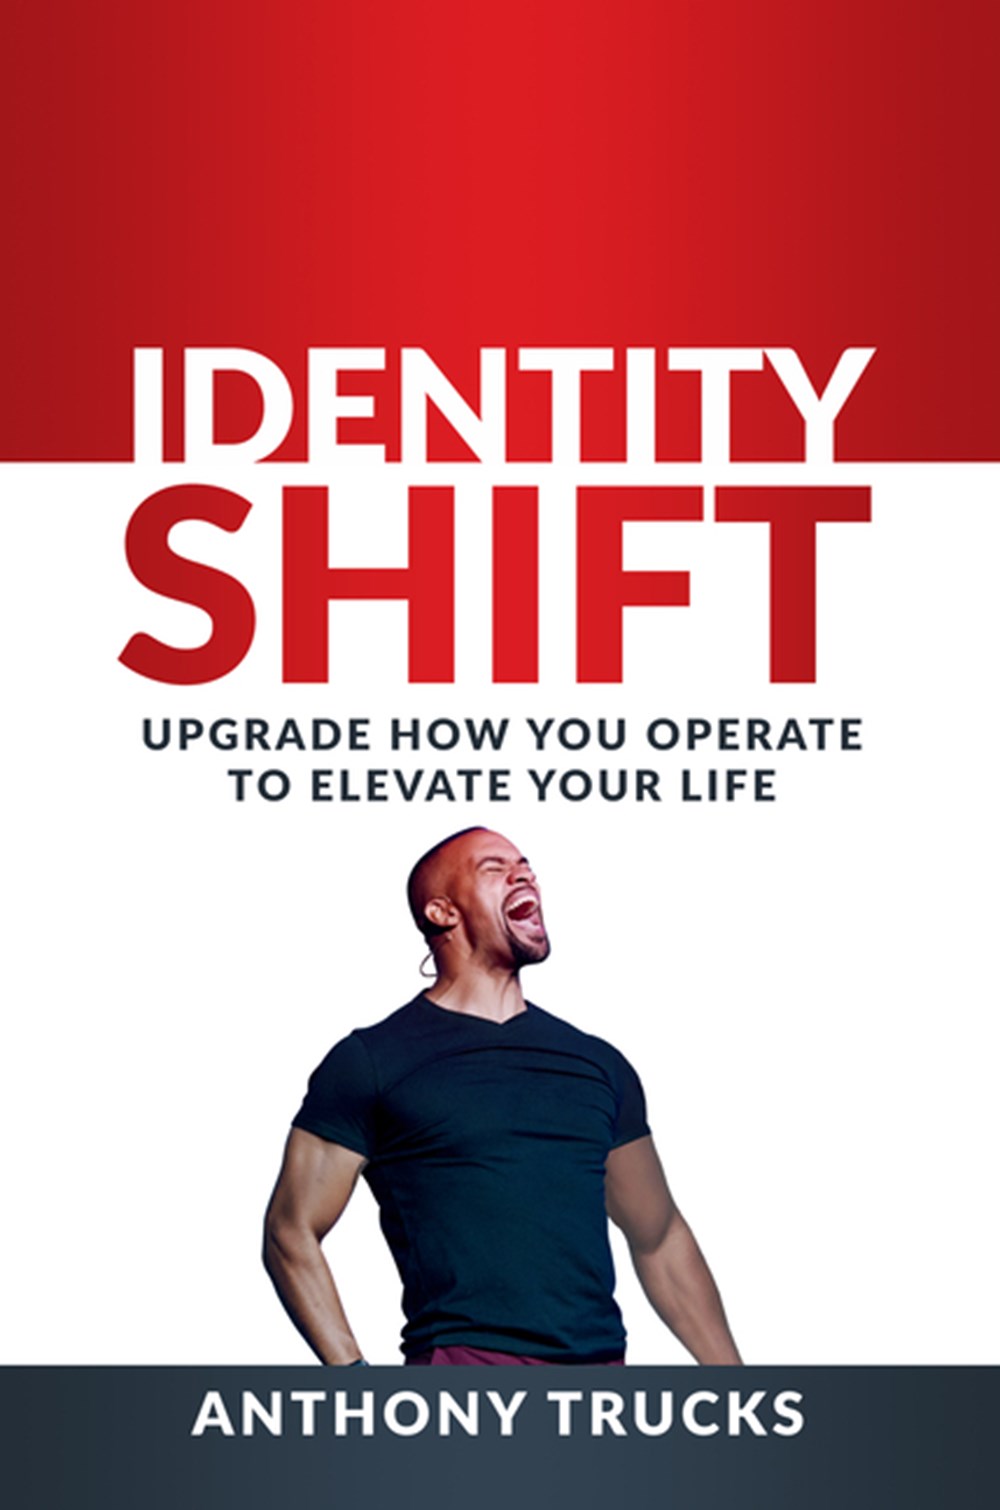 Identity Shift Upgrade How You Operate to Elevate Your Life